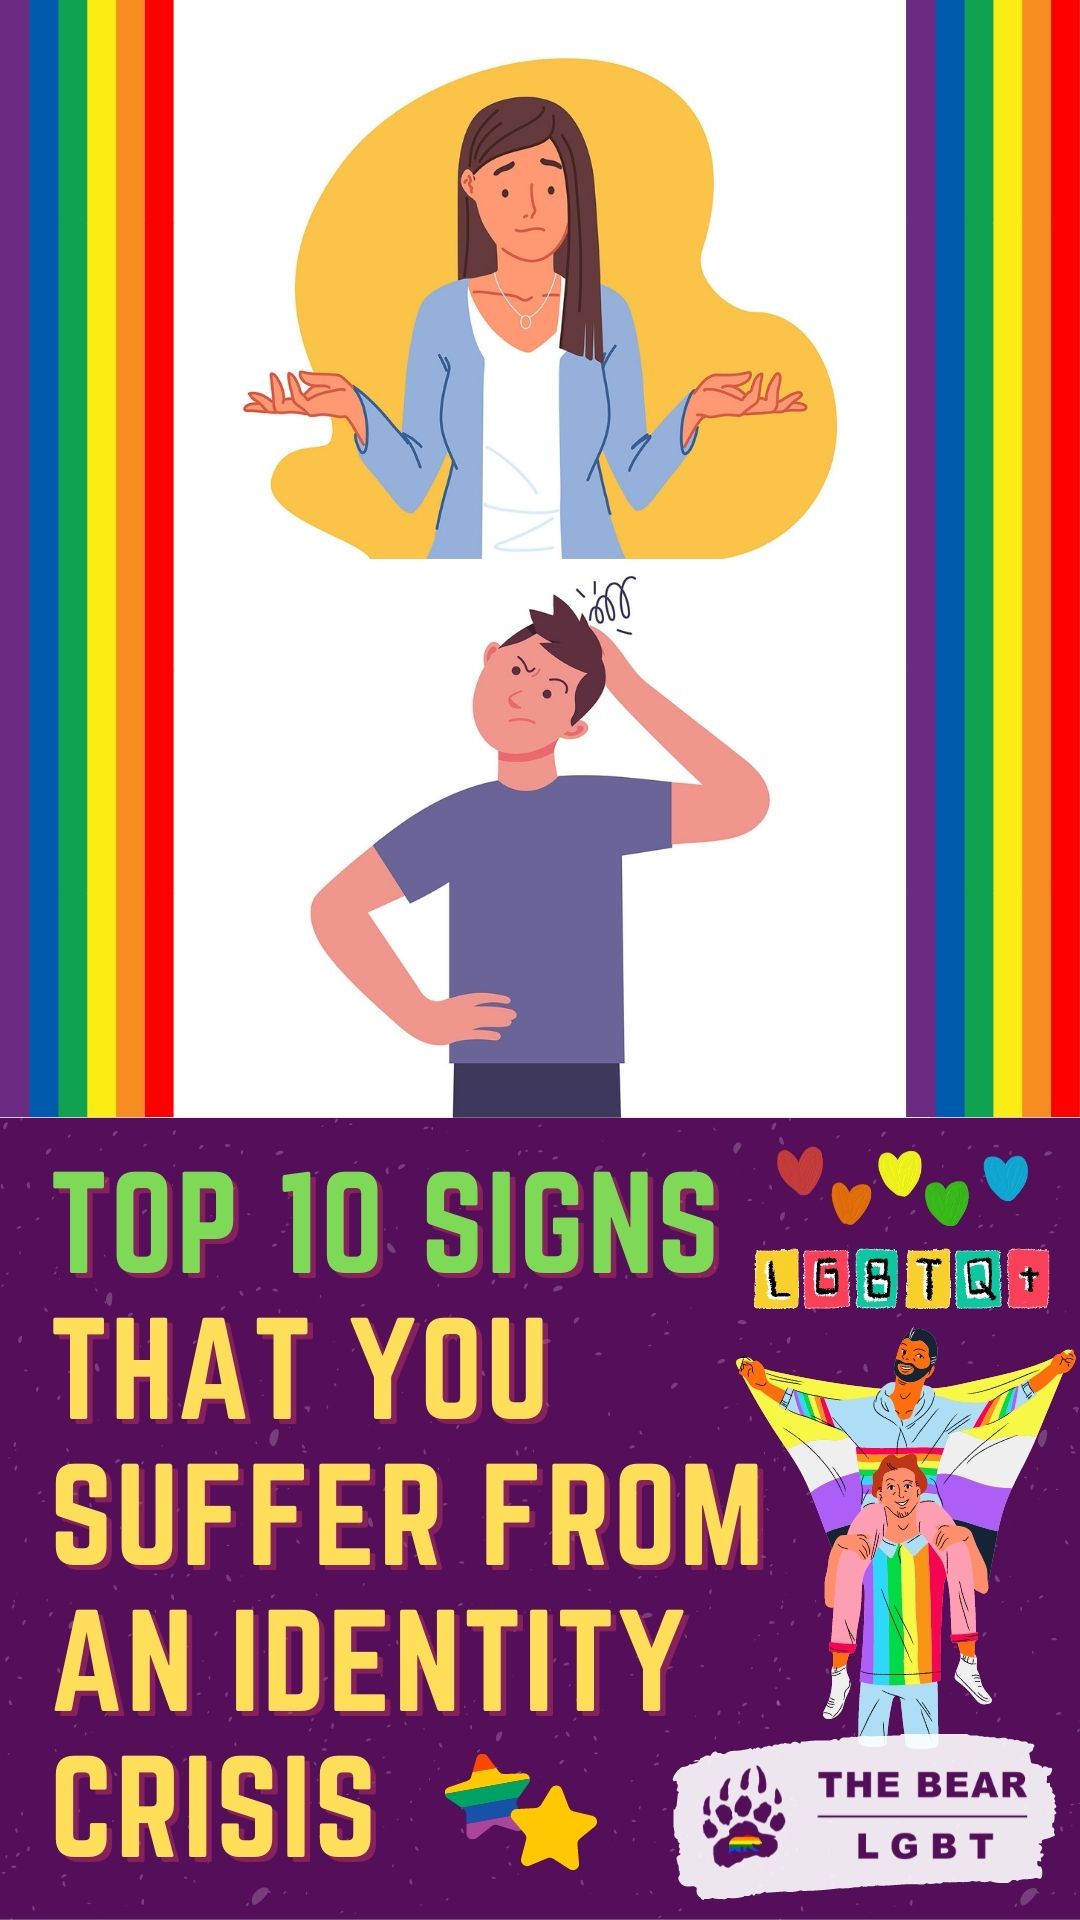 Top 10 Signs that You Suffer from An Identity Crisis